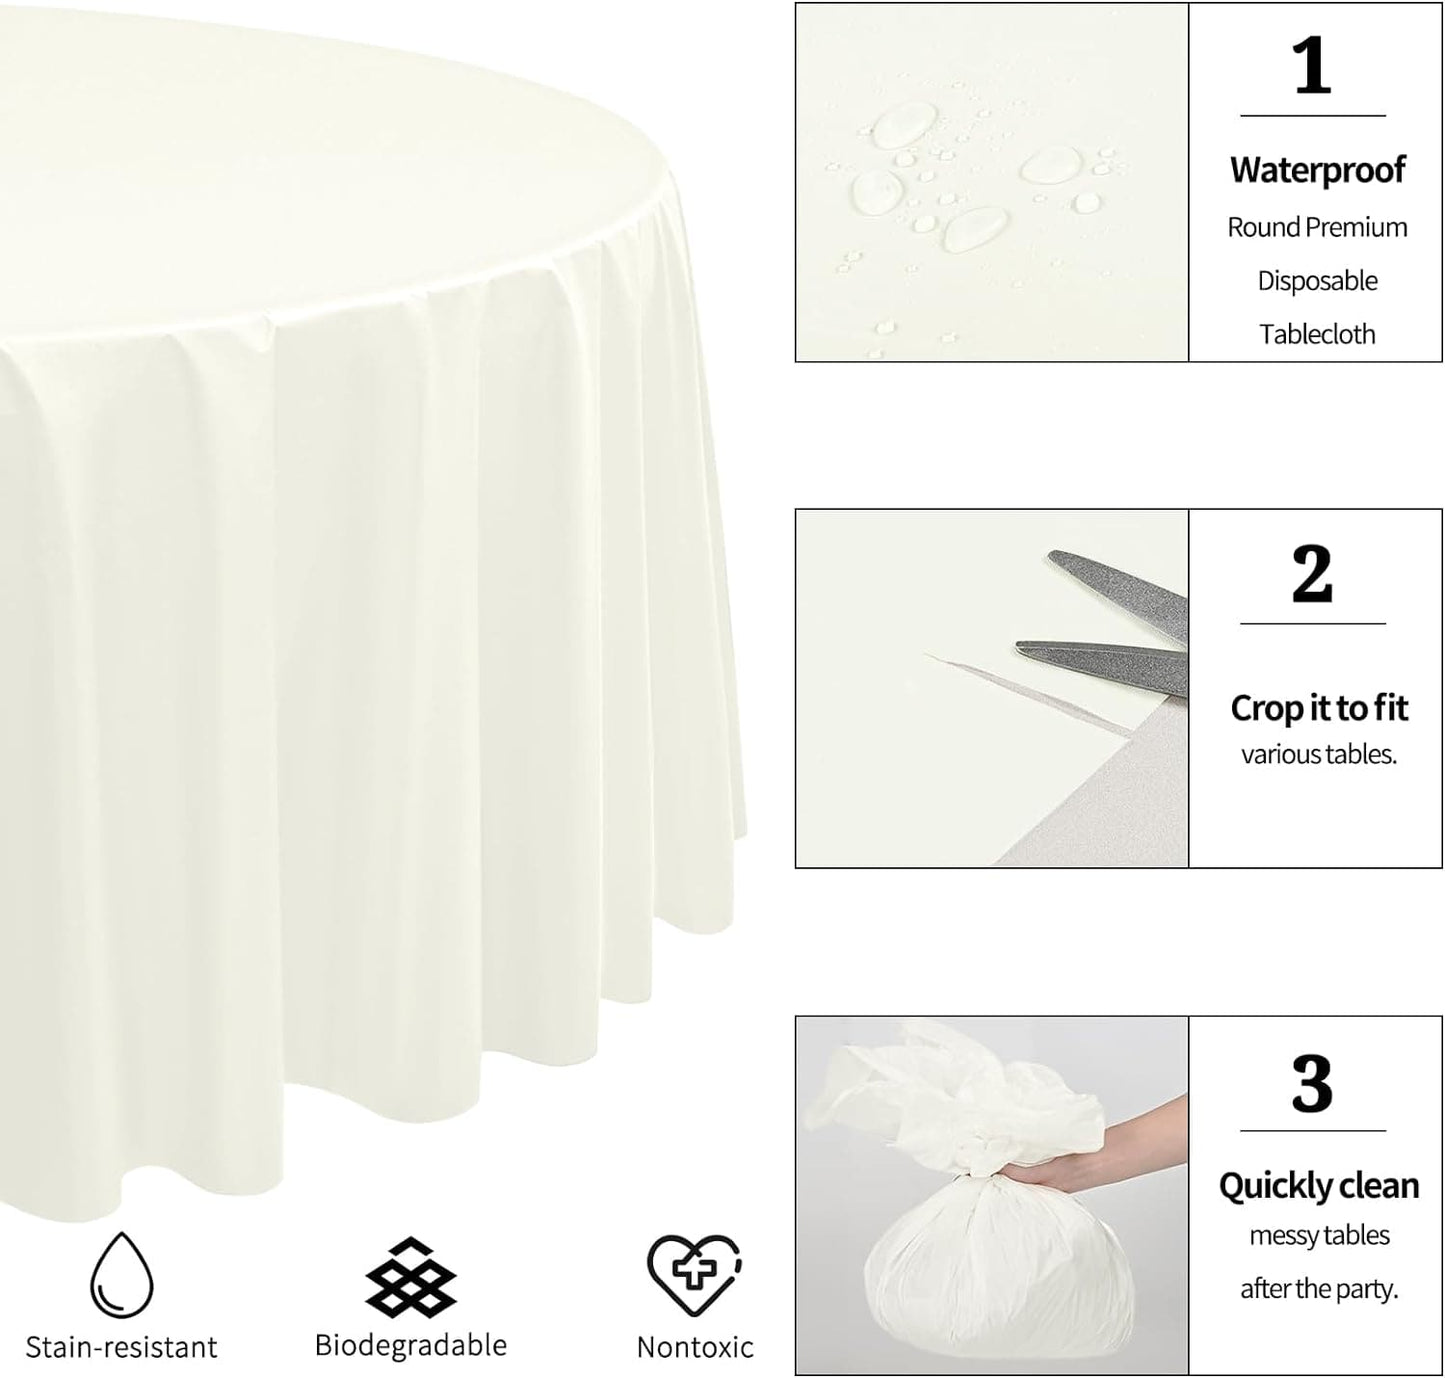 15 Pack Plastic Round Tablecloth 60 inch